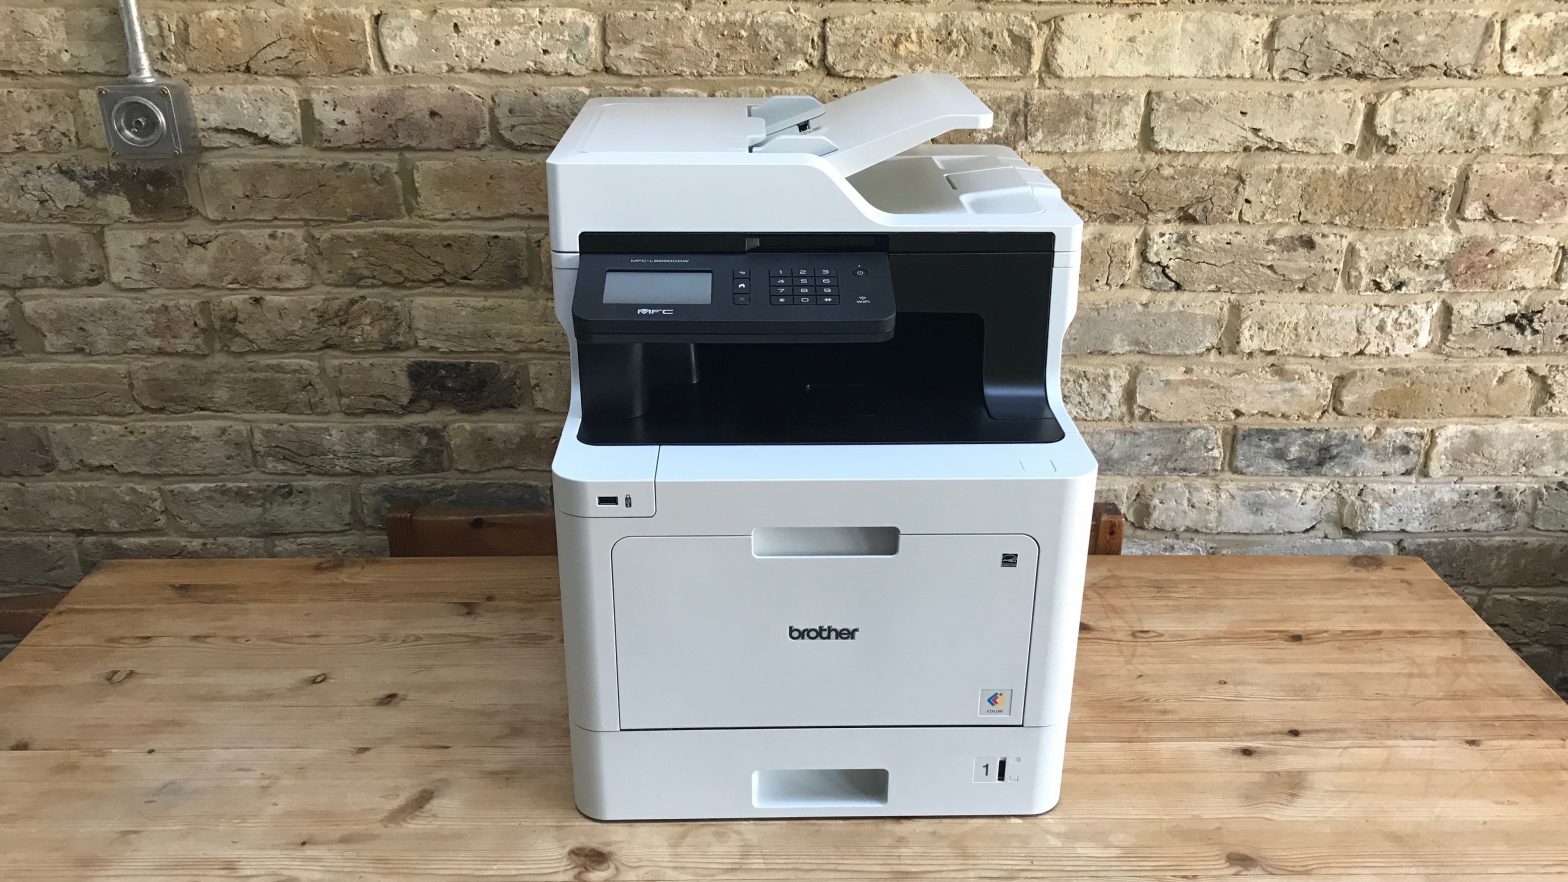 brother Multifunction Printer User Guide